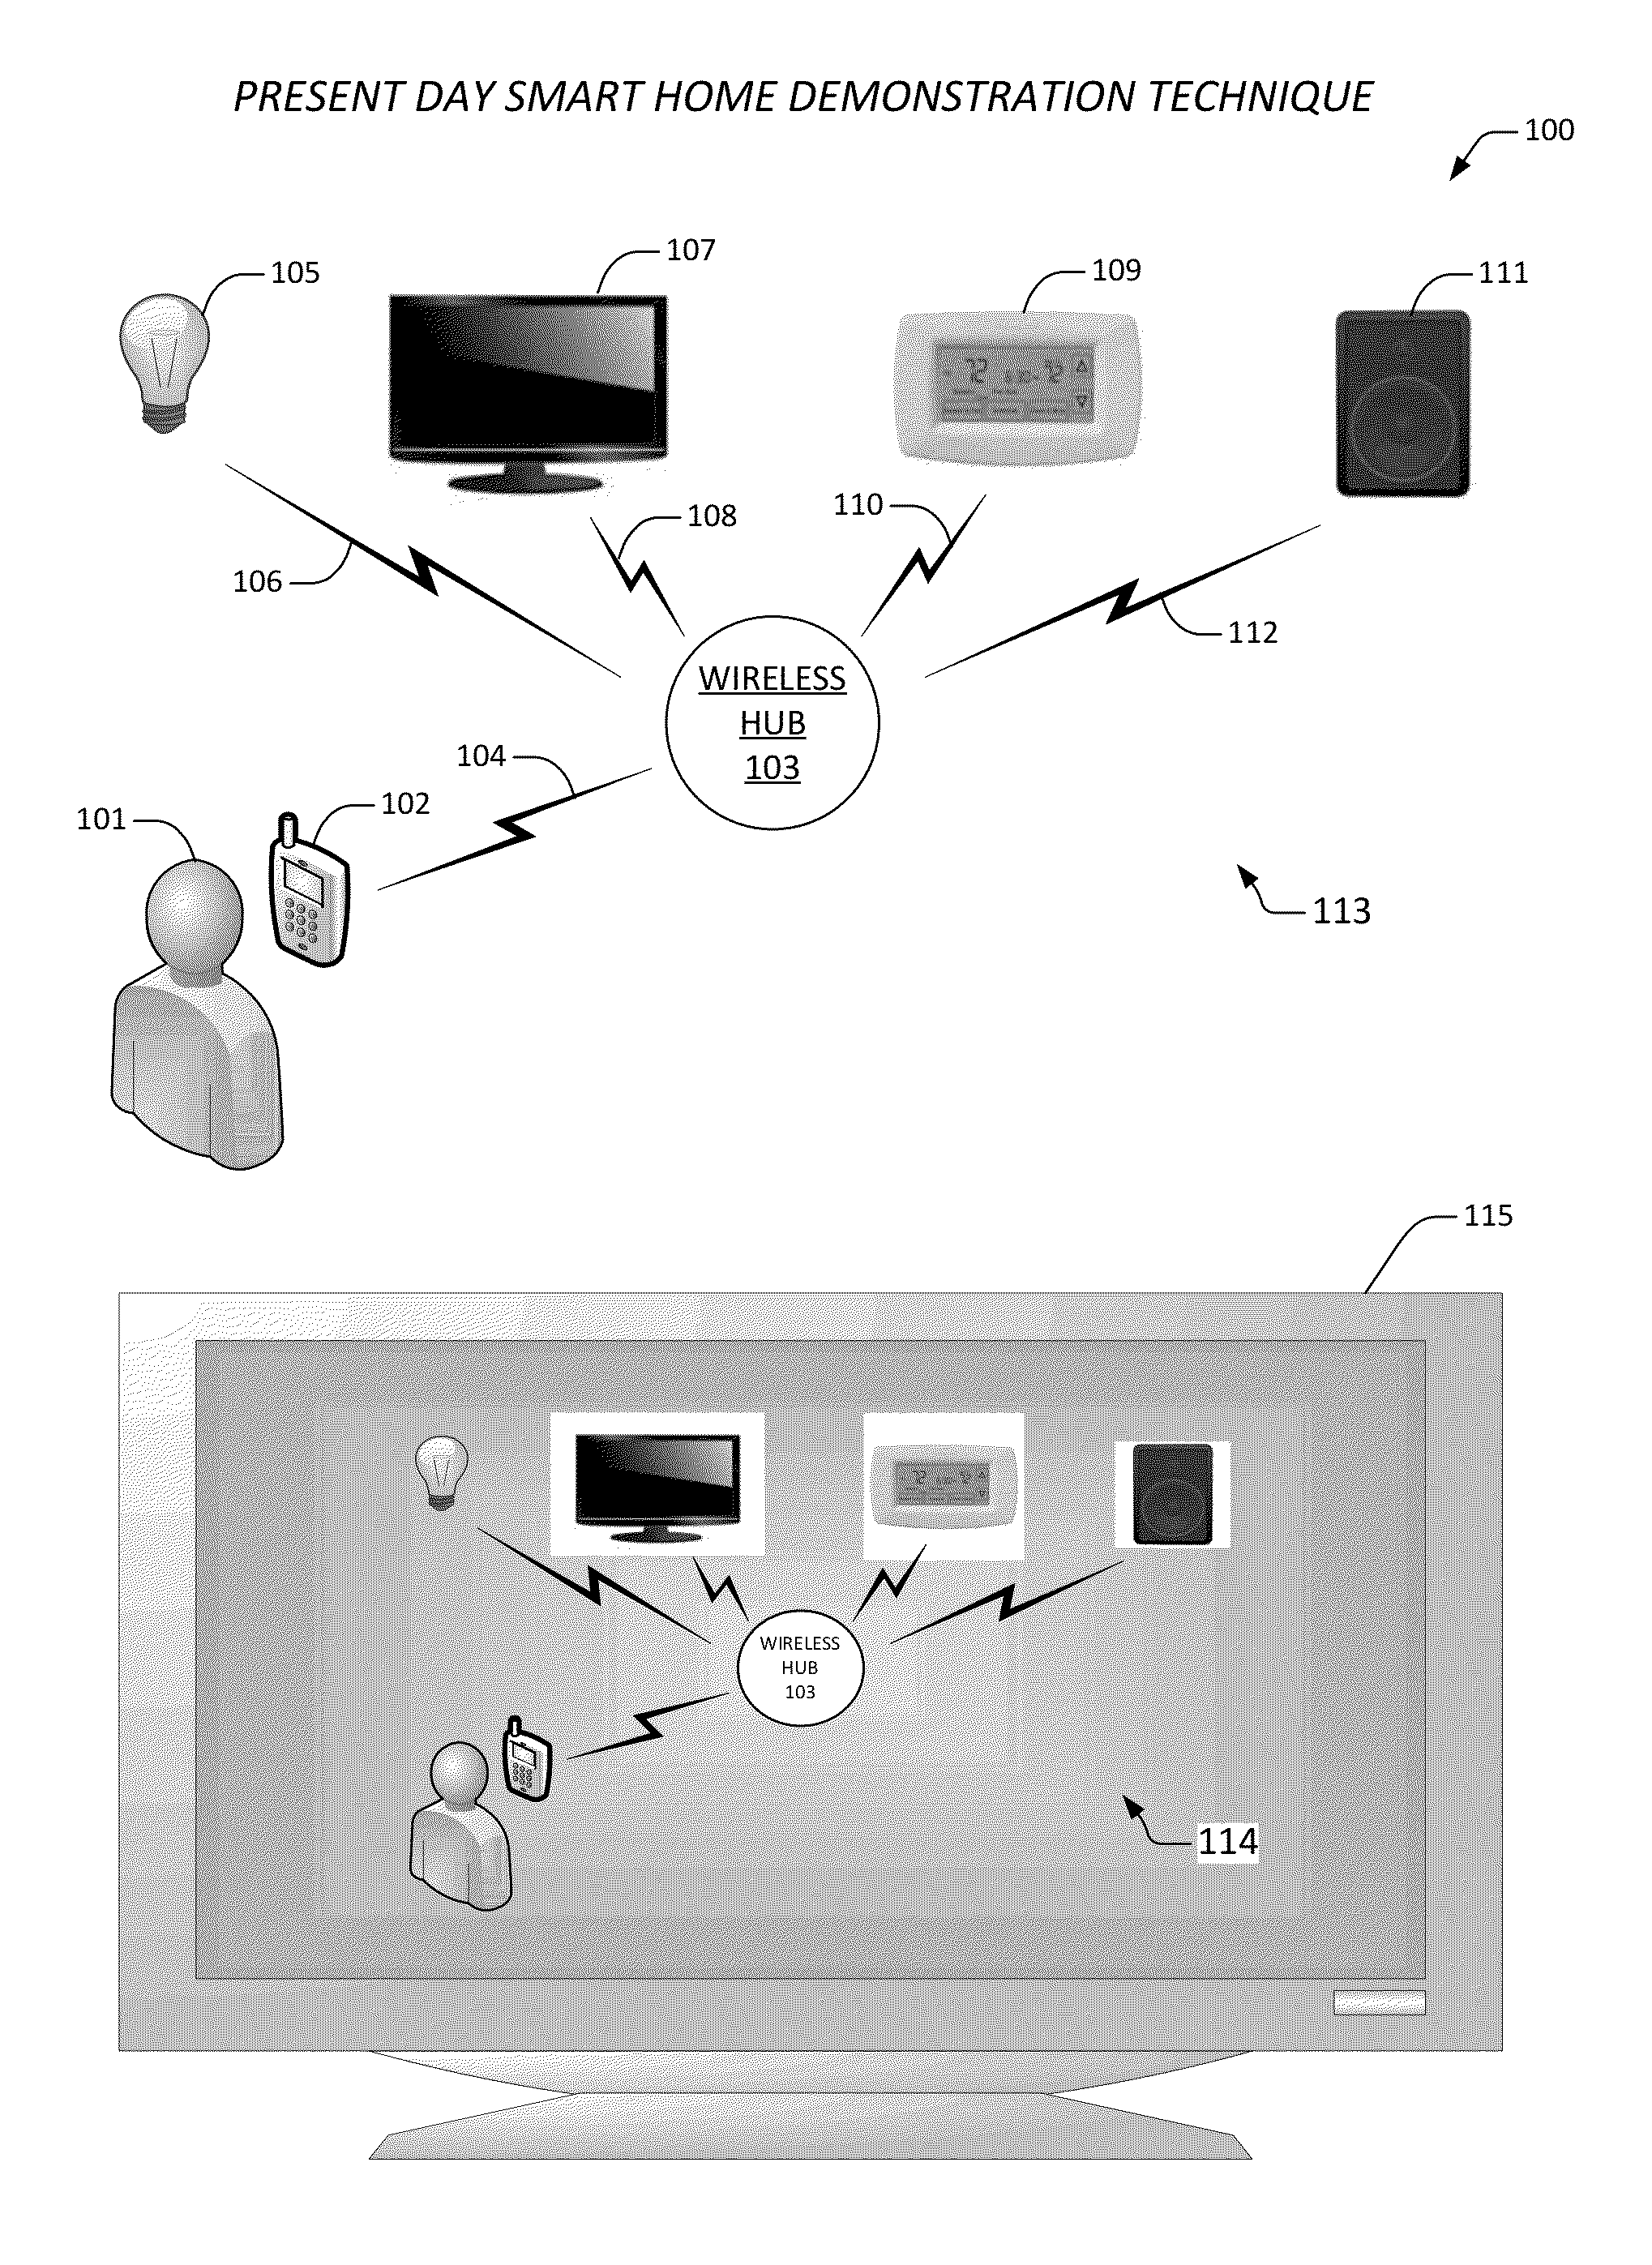 Apparatus and method for the virtual demonstration of a smart phone controlled smart home using a website